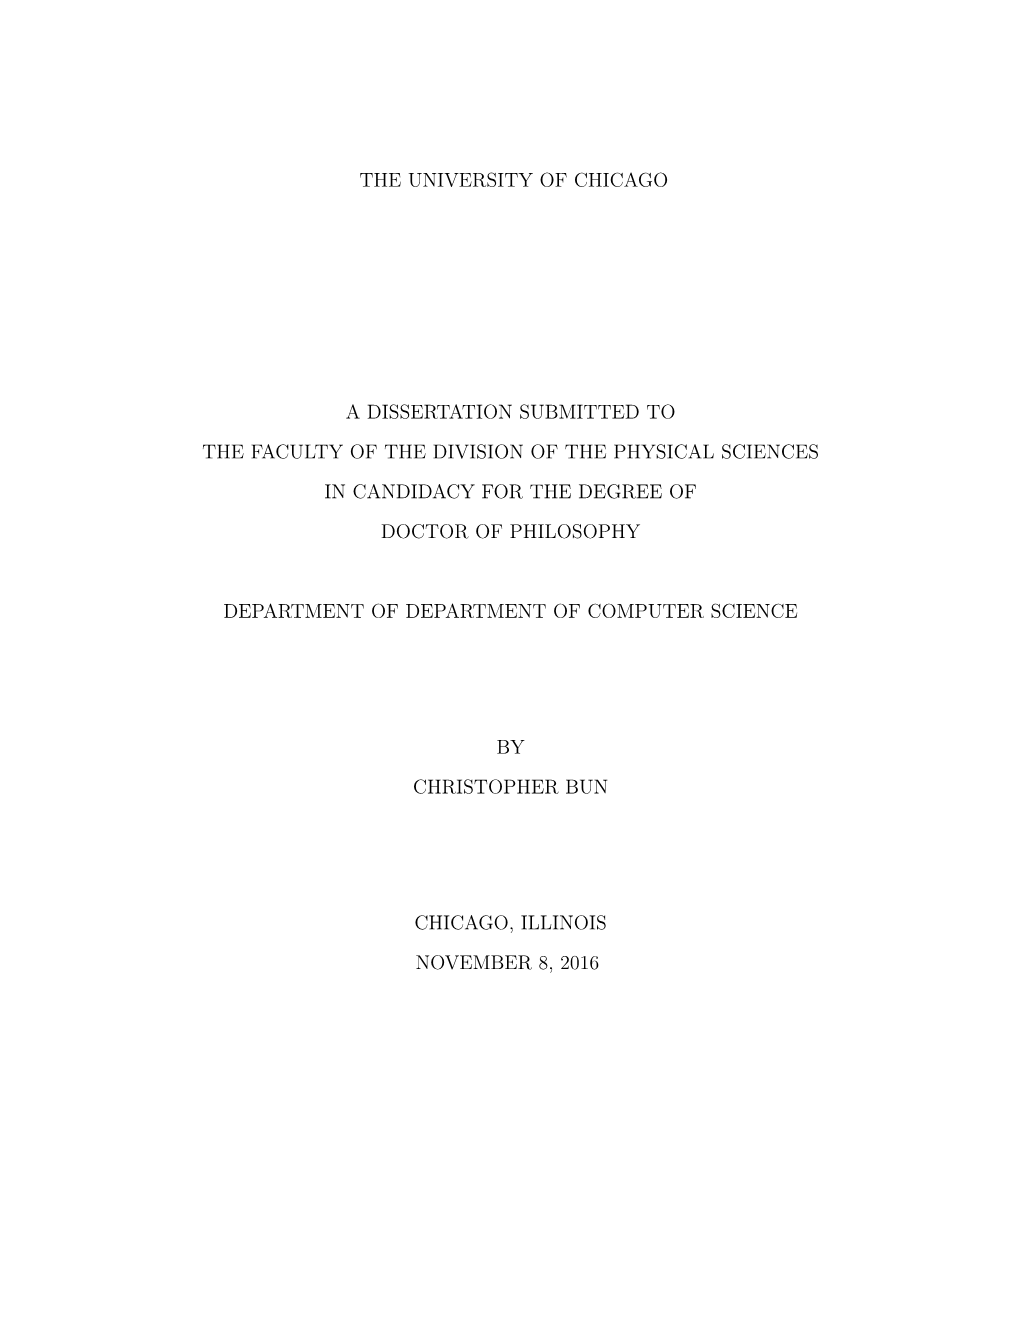 The University of Chicago a Dissertation Submitted To